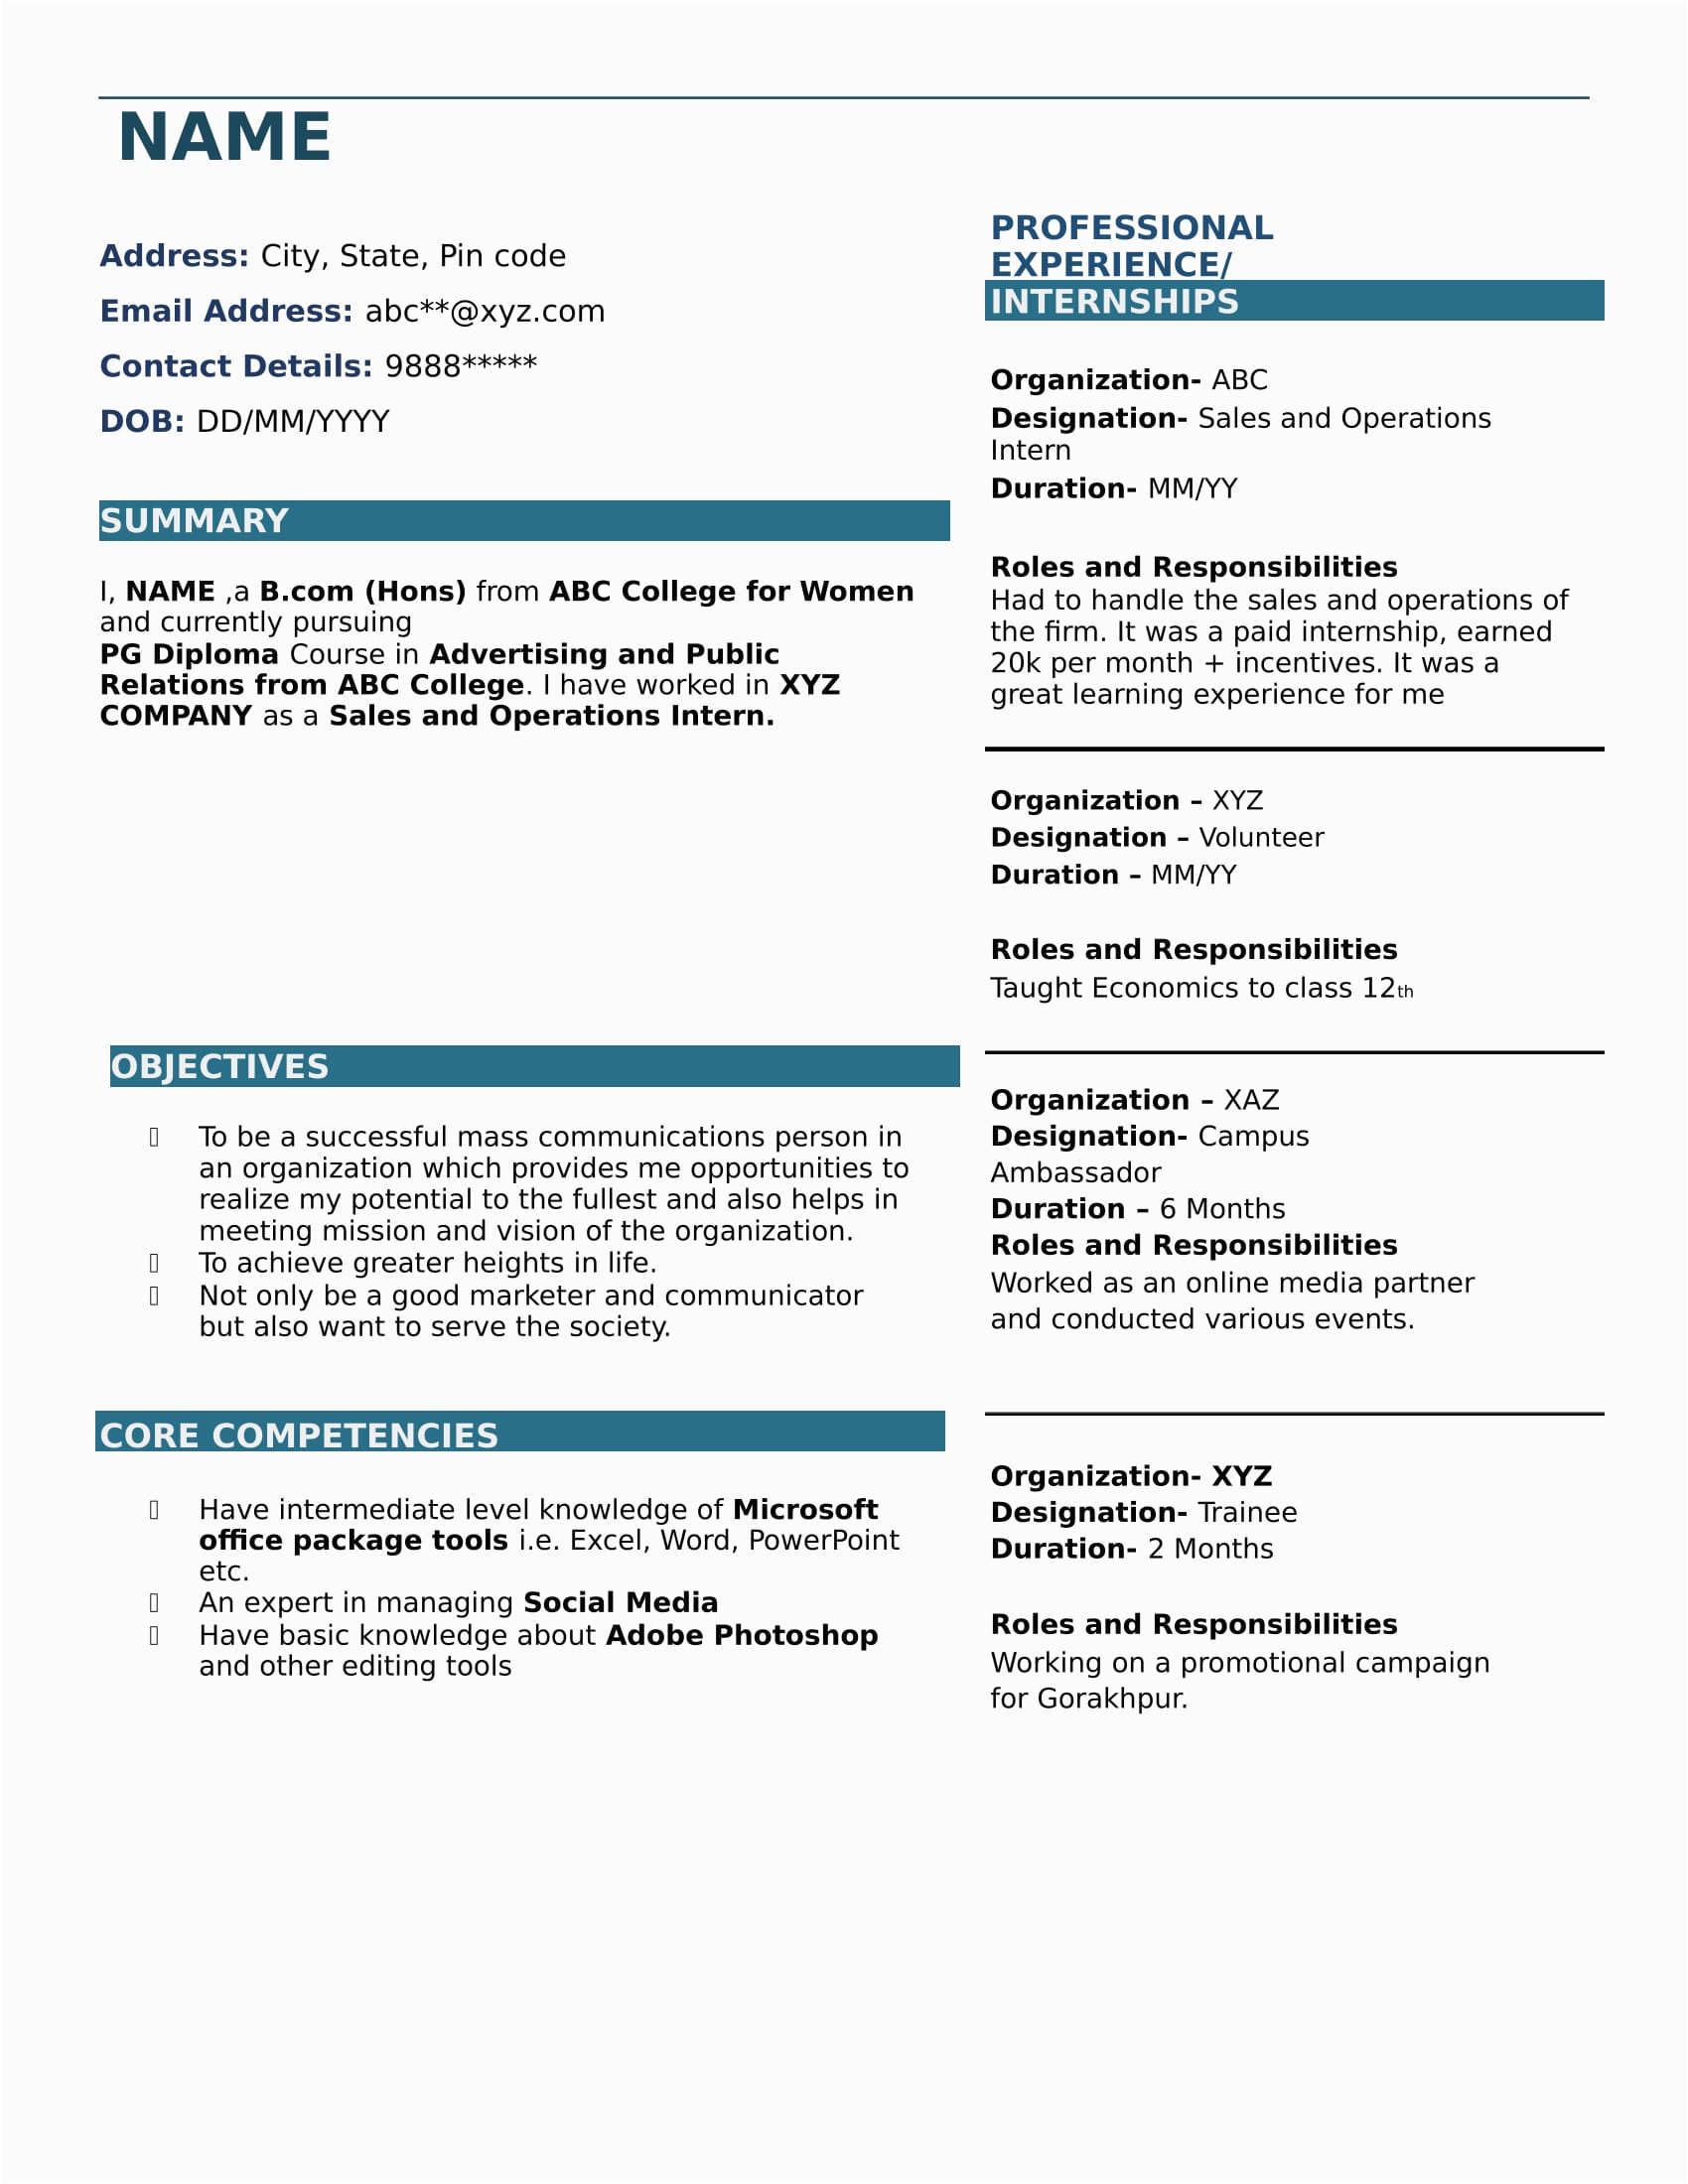 About Me In Resume Sample for Freshers Resume Templates for B Freshers Download Free